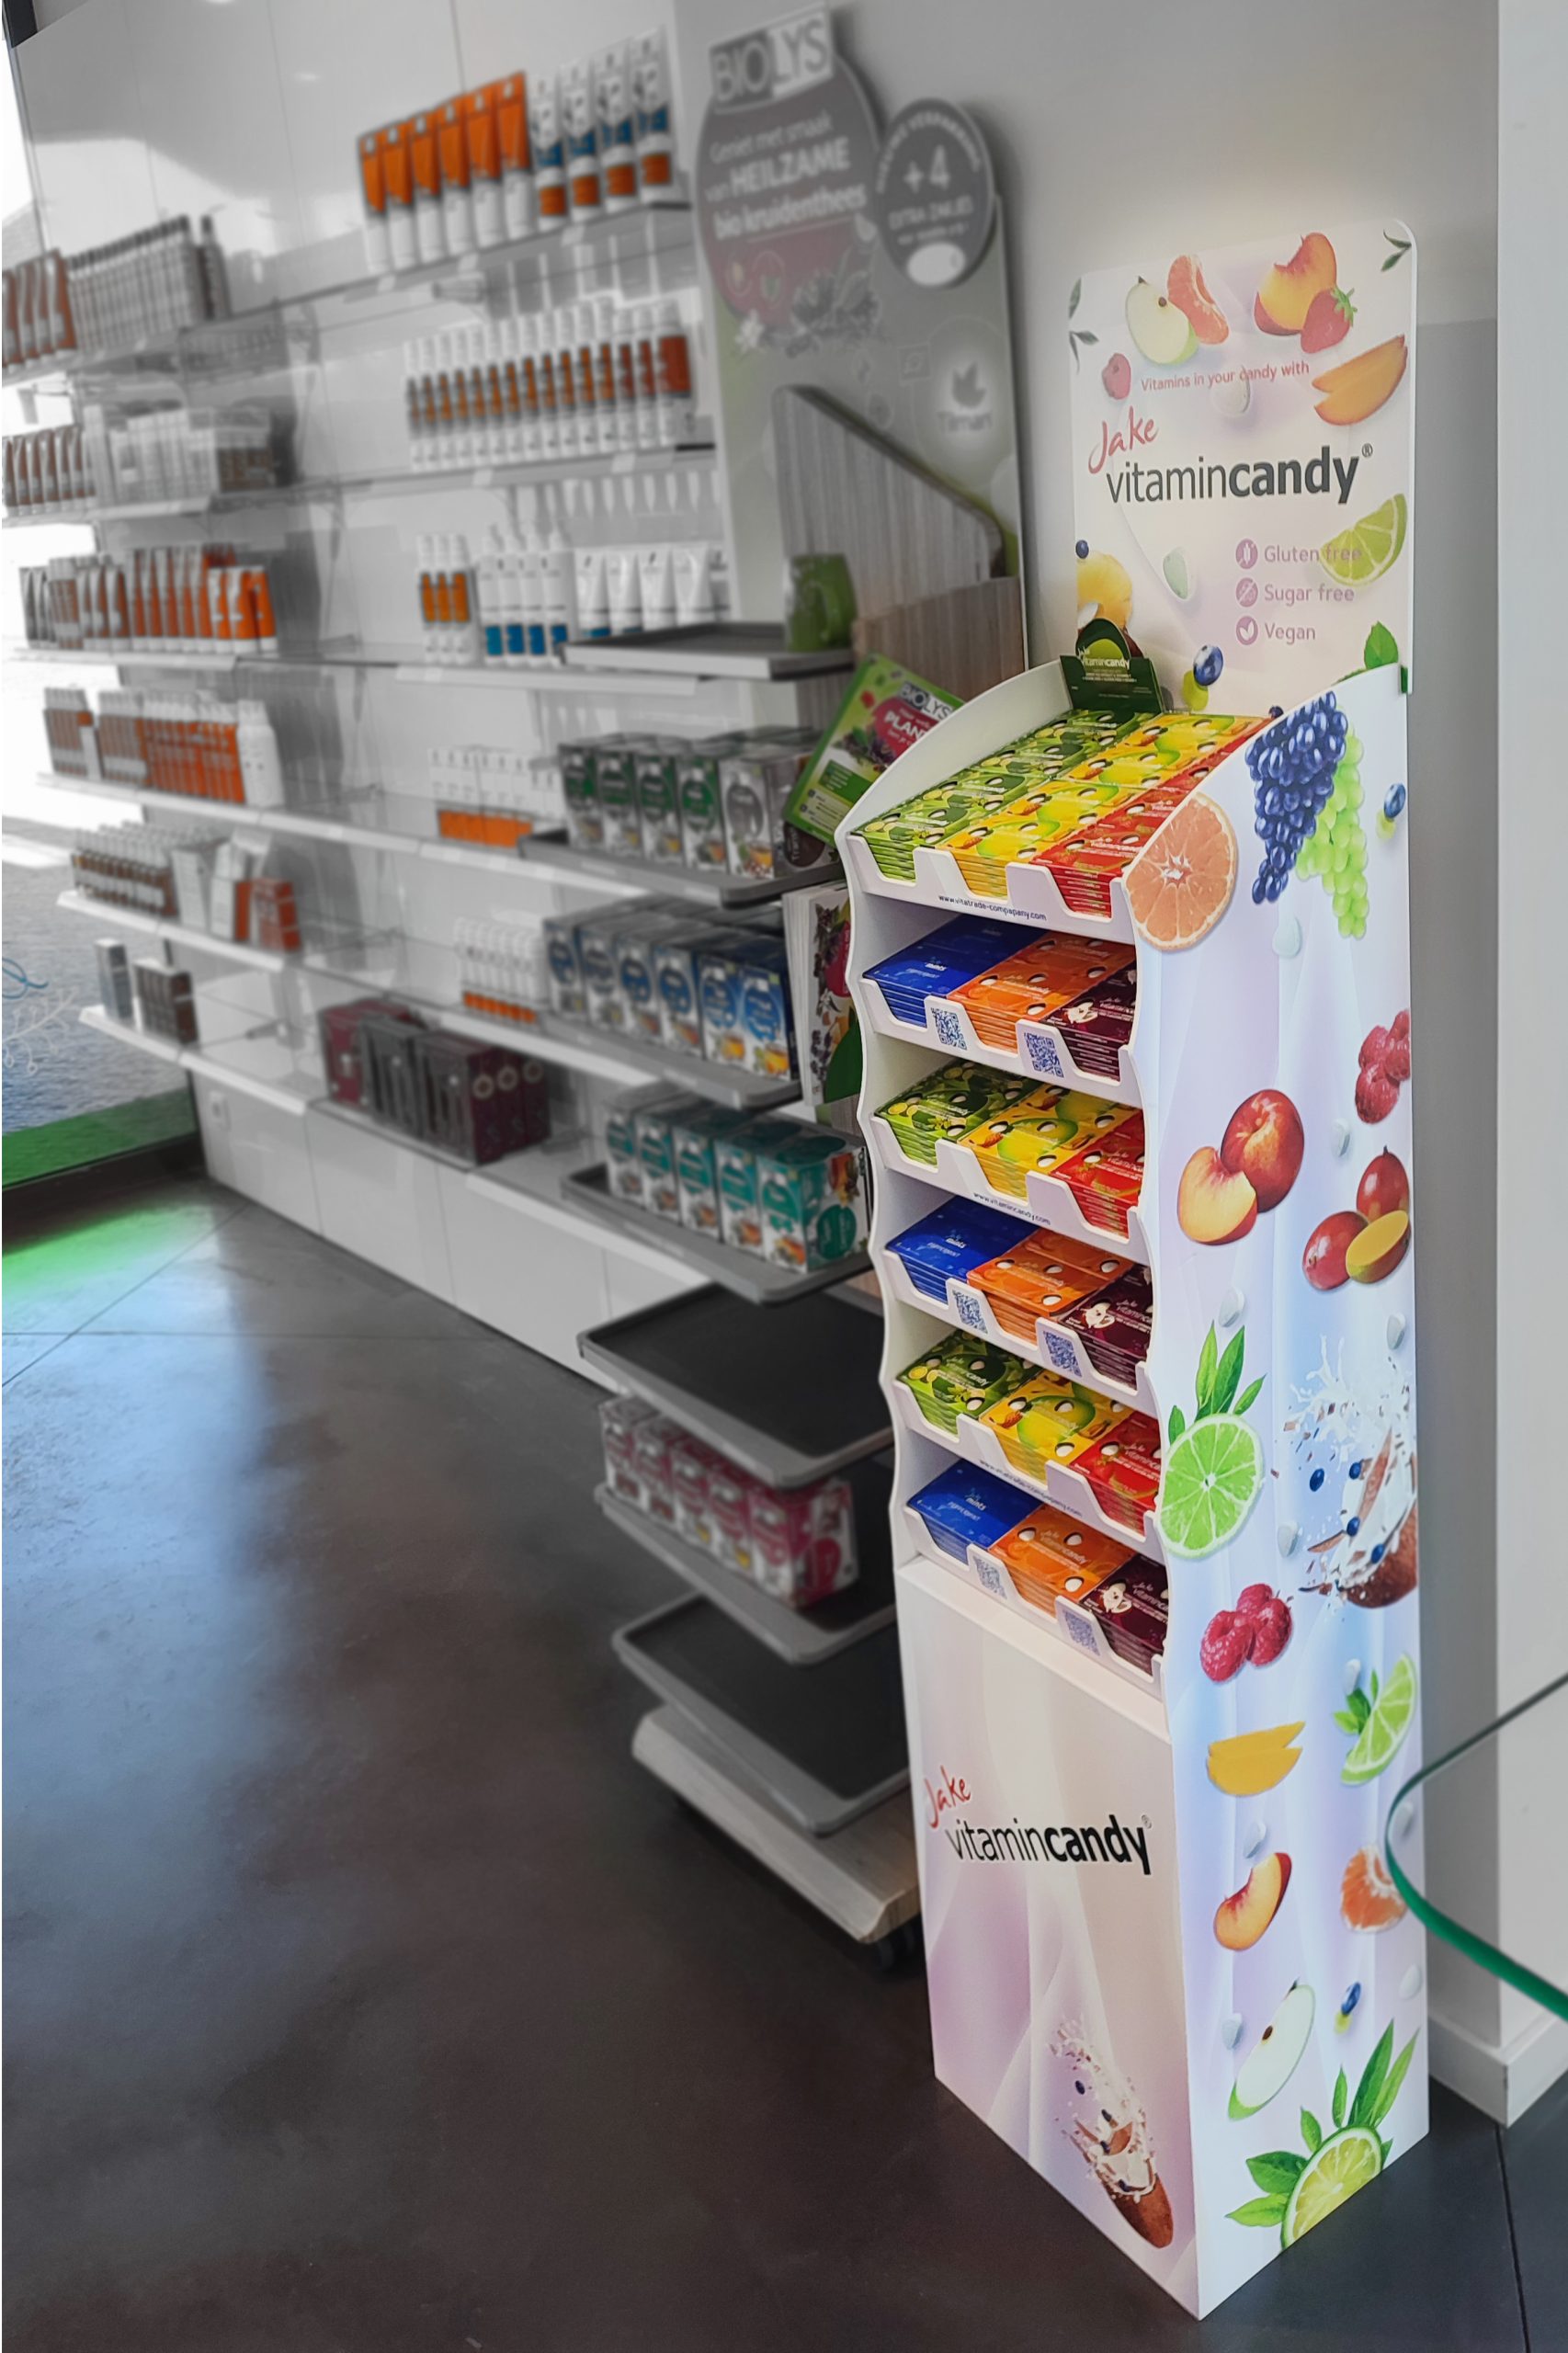 Jake Vitamincandy boosts launch with customised POS materials